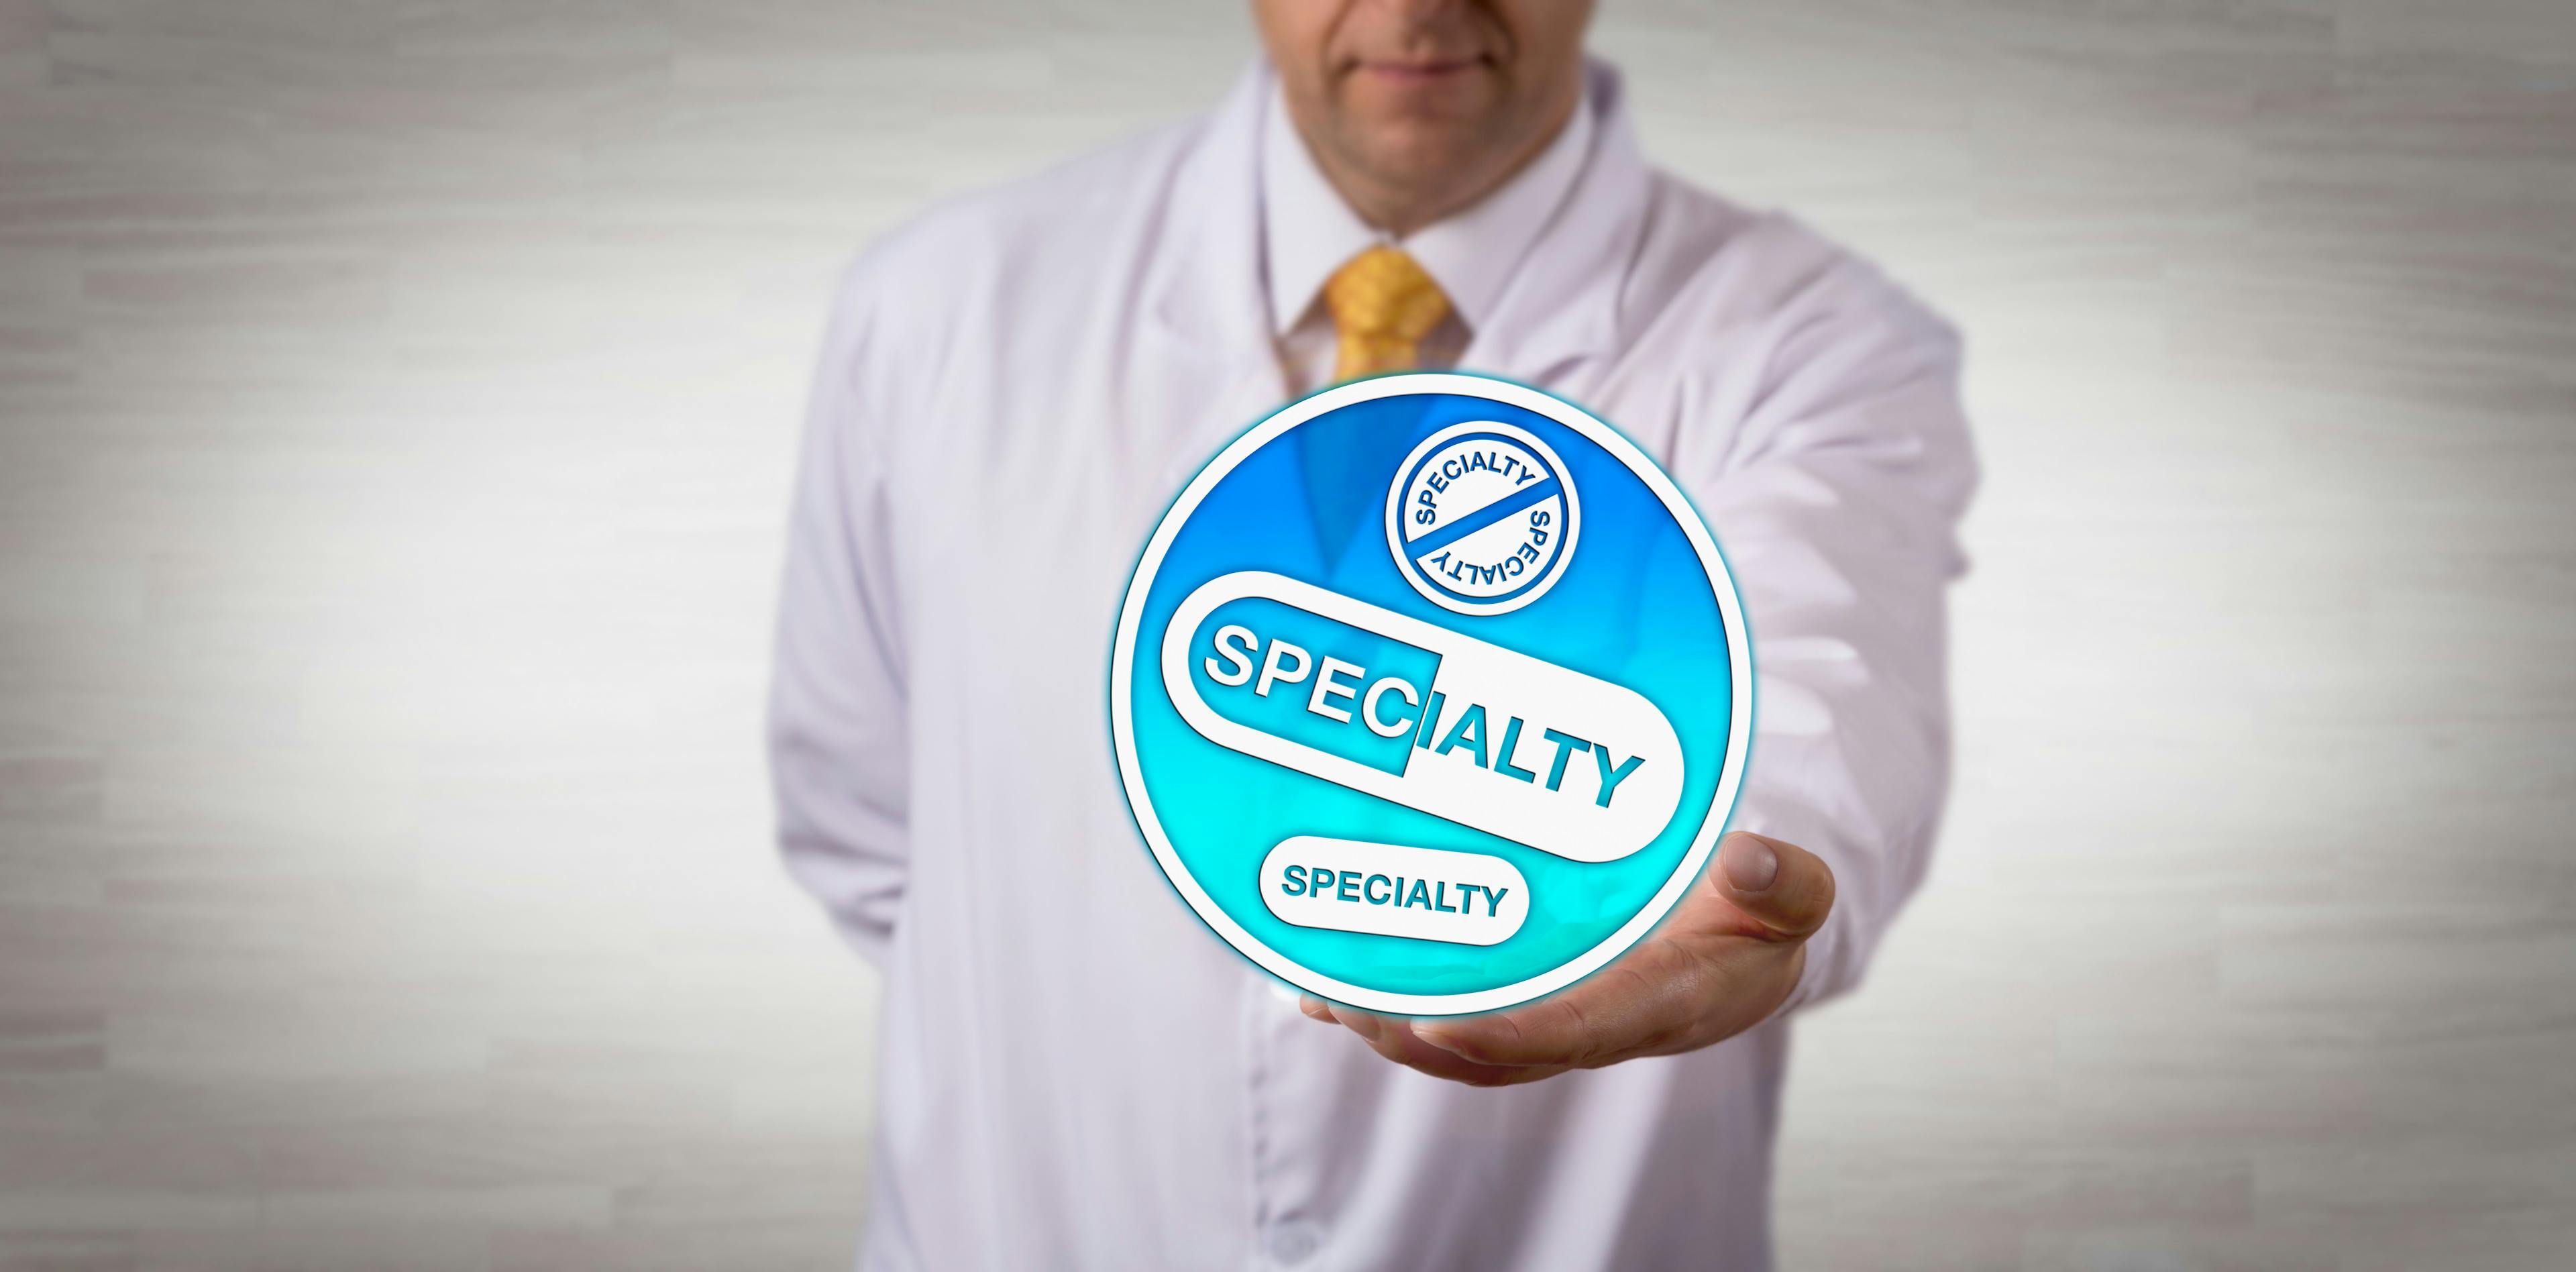 Walgreens Boots Alliance 'Specialty Pharmacy Accelerator' Says It Helps Lower Out-of-Pocket Costs, Improve Outcomes for People with MS